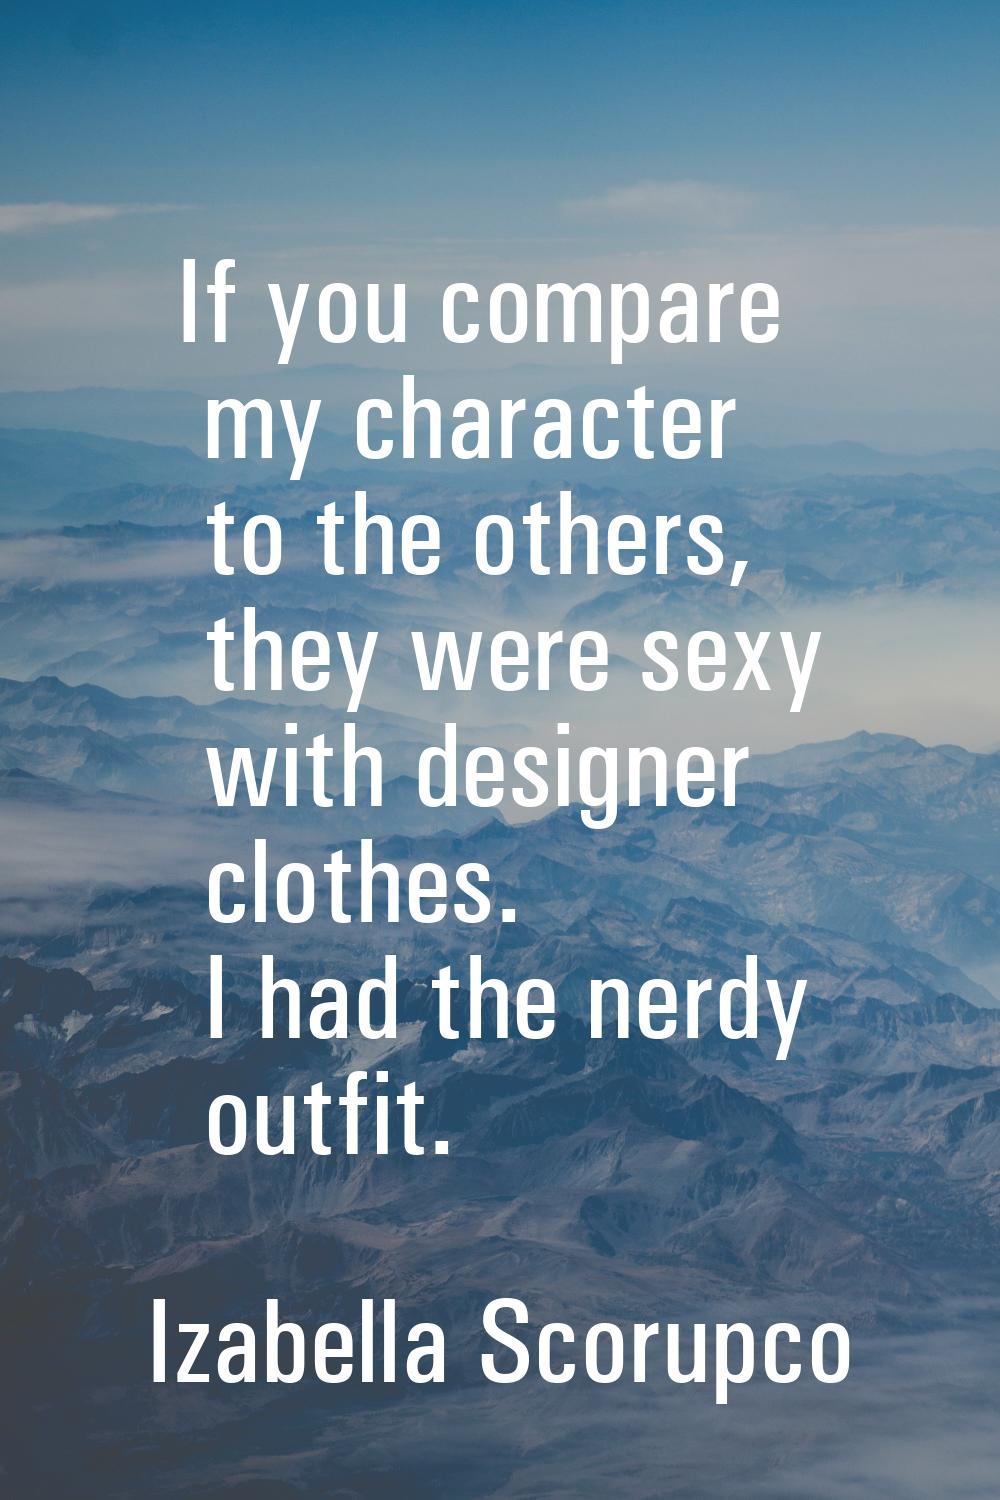 If you compare my character to the others, they were sexy with designer clothes. I had the nerdy ou